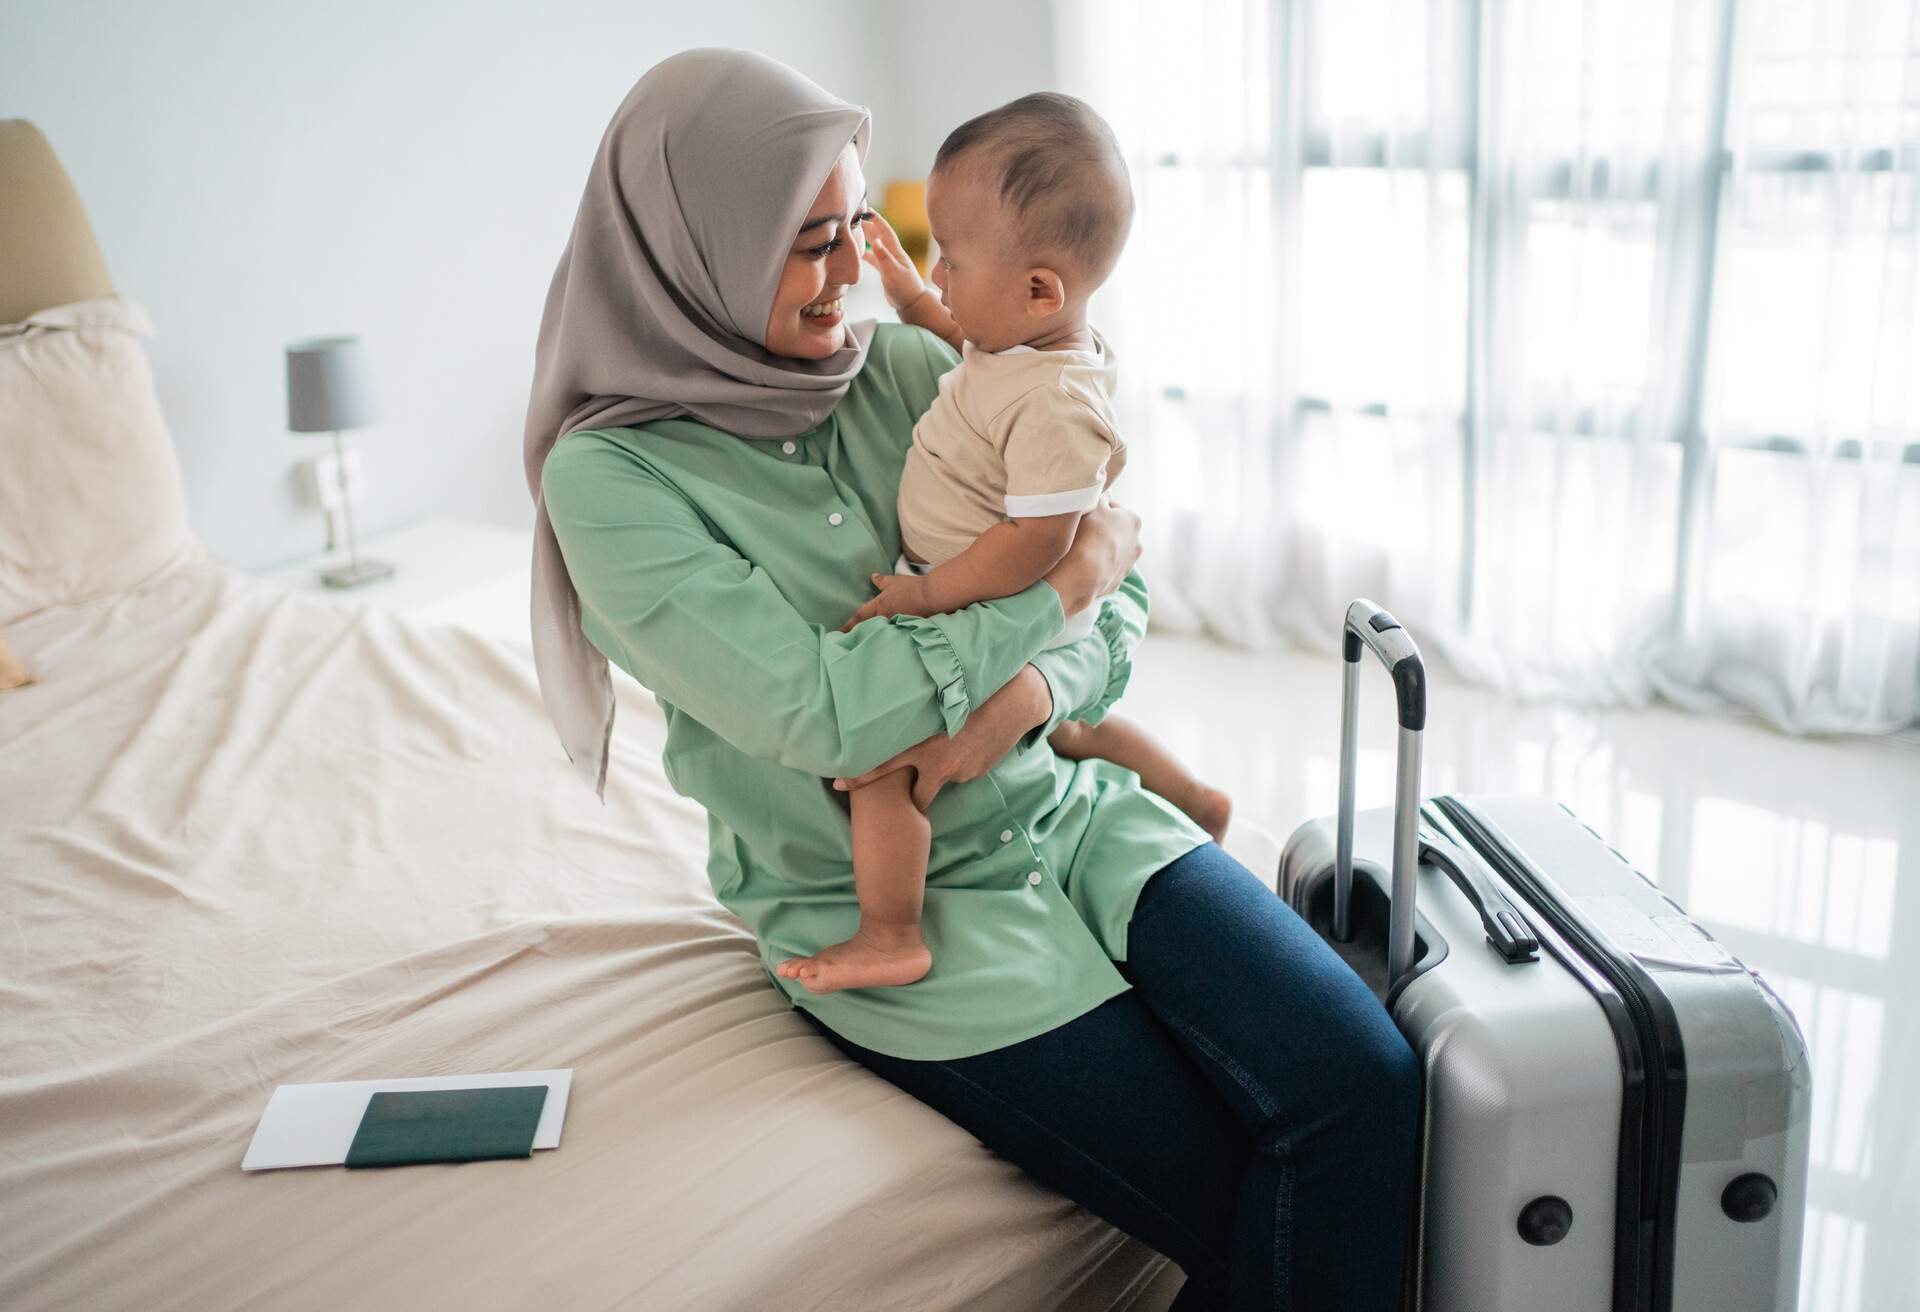 Muslim Asian mothers carry their babies while sitting on the bed before leaving with a suitcase